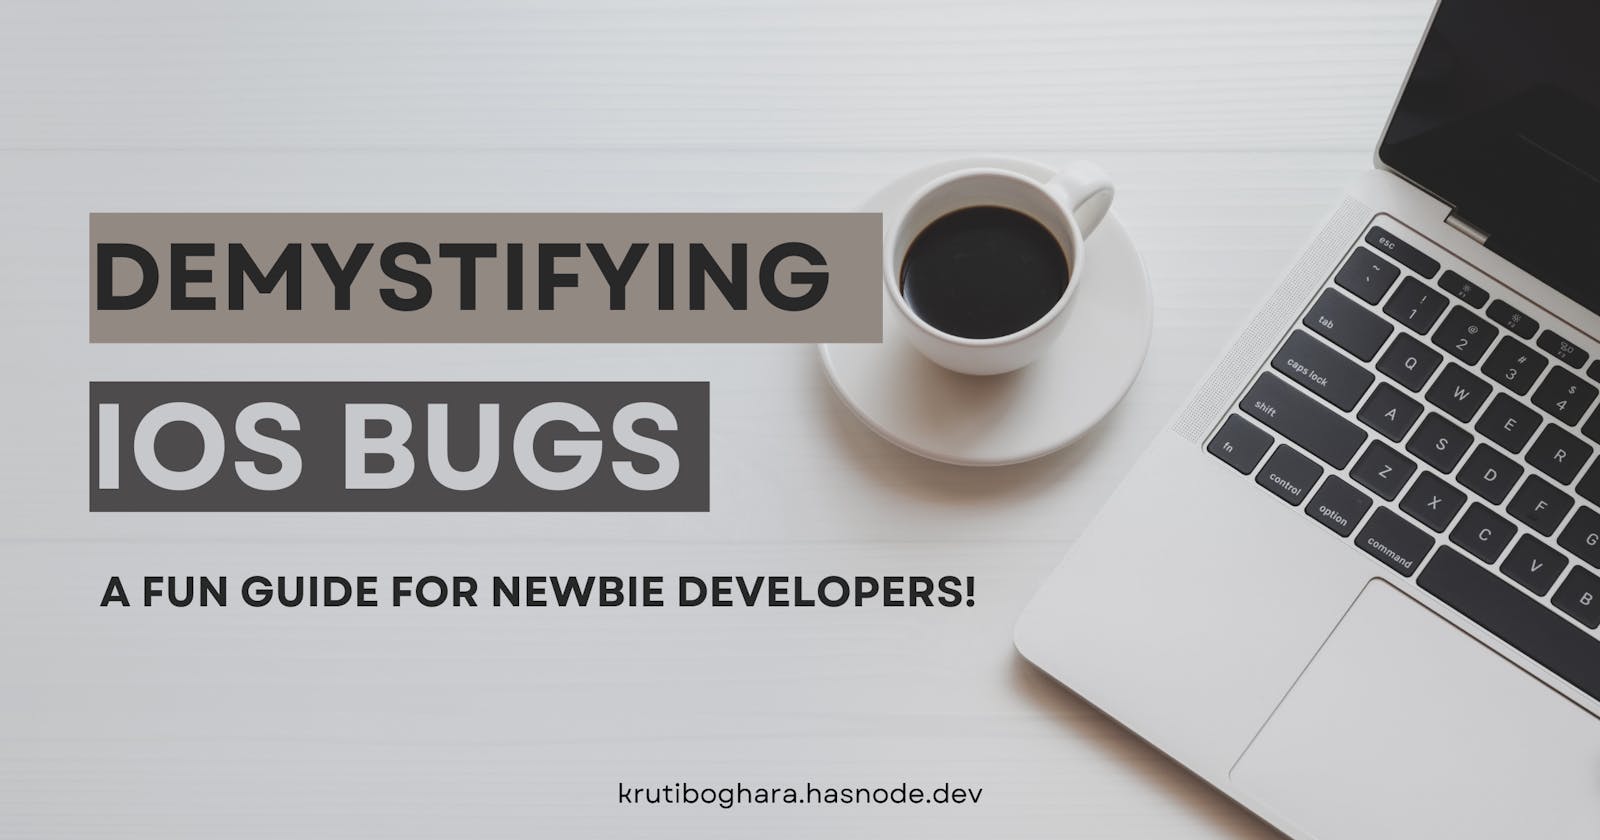 Demystifying iOS Bugs: A Fun Guide for Newbie Developers! ✍🏻